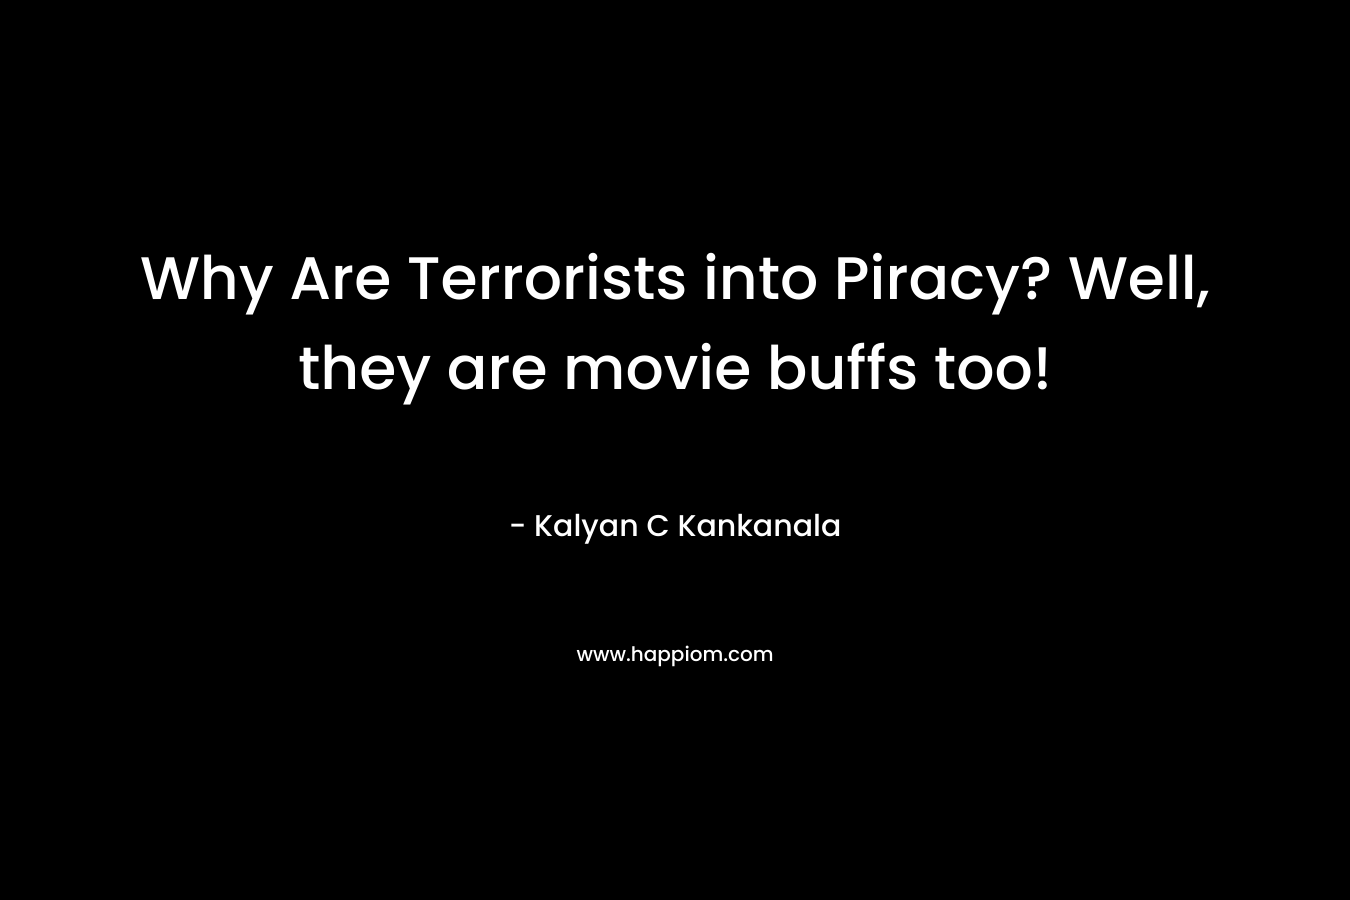 Why Are Terrorists into Piracy? Well, they are movie buffs too! – Kalyan C Kankanala